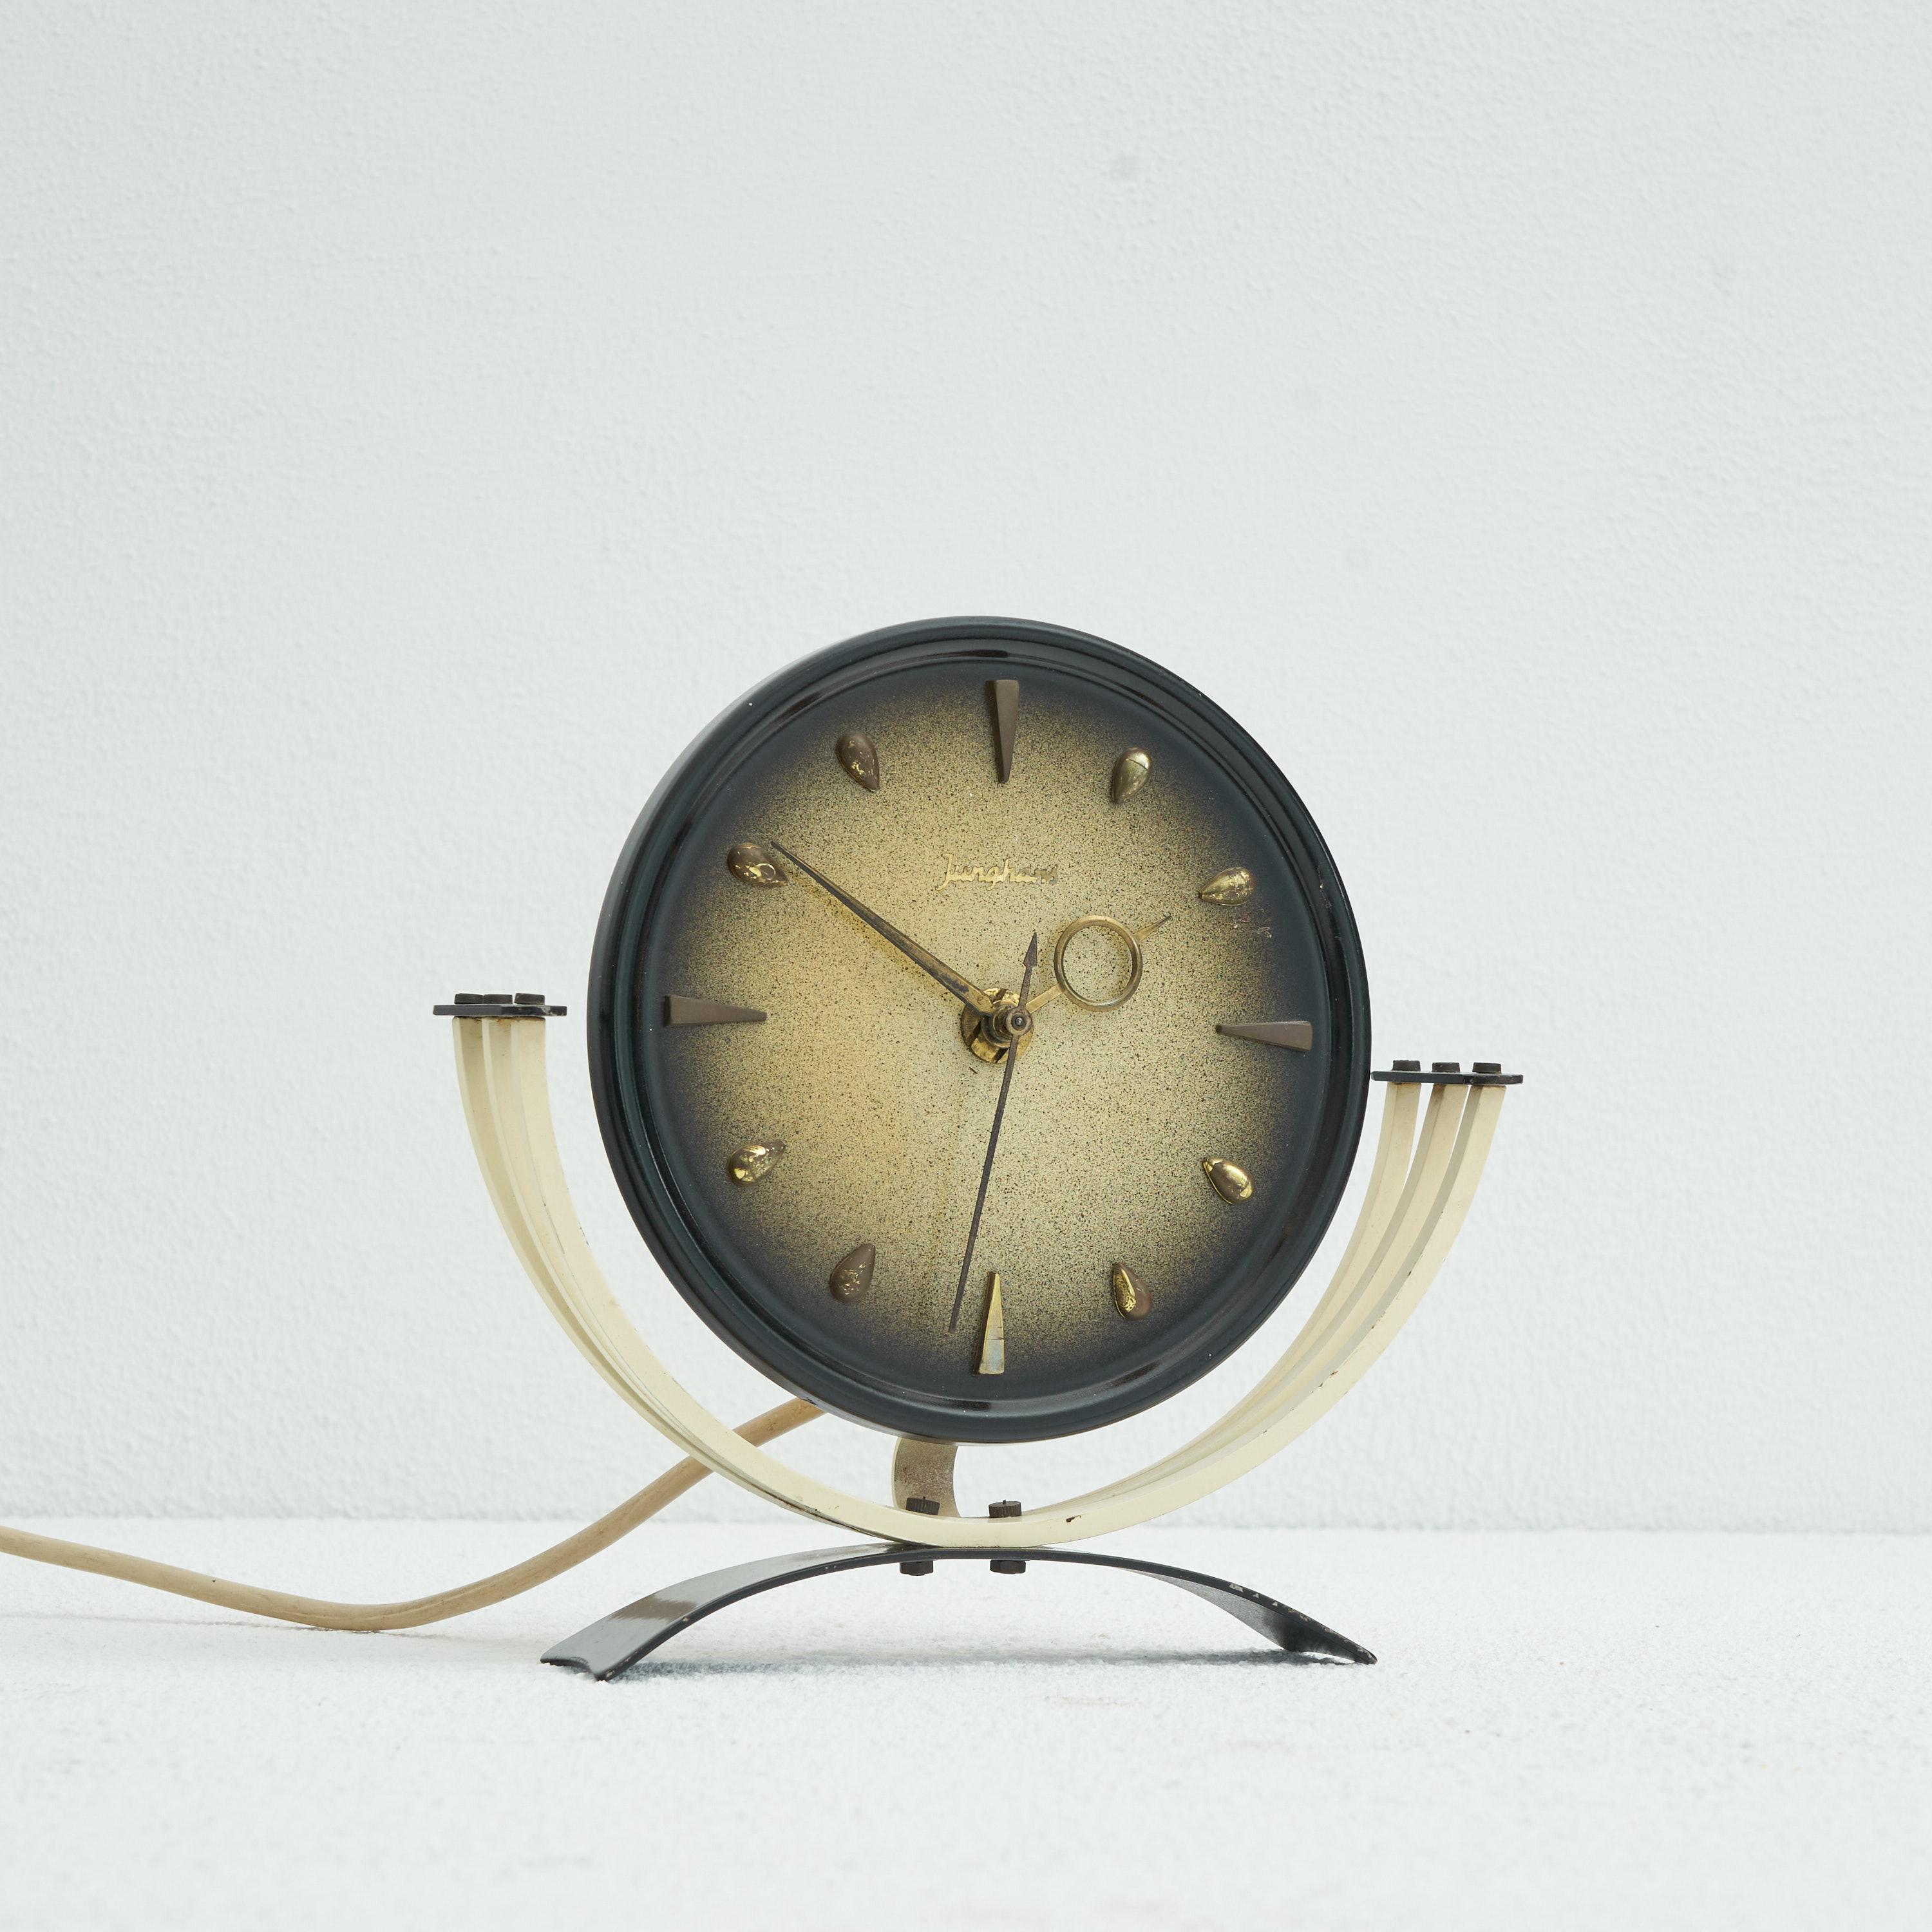 Junghans mid-century table clock in metal and brass. Germany, 1950s

Decorative and elegant mid century table clock made by renowned clock maker Junghans. A very delicate and joyful design, this clock is quintessentially mid century. The